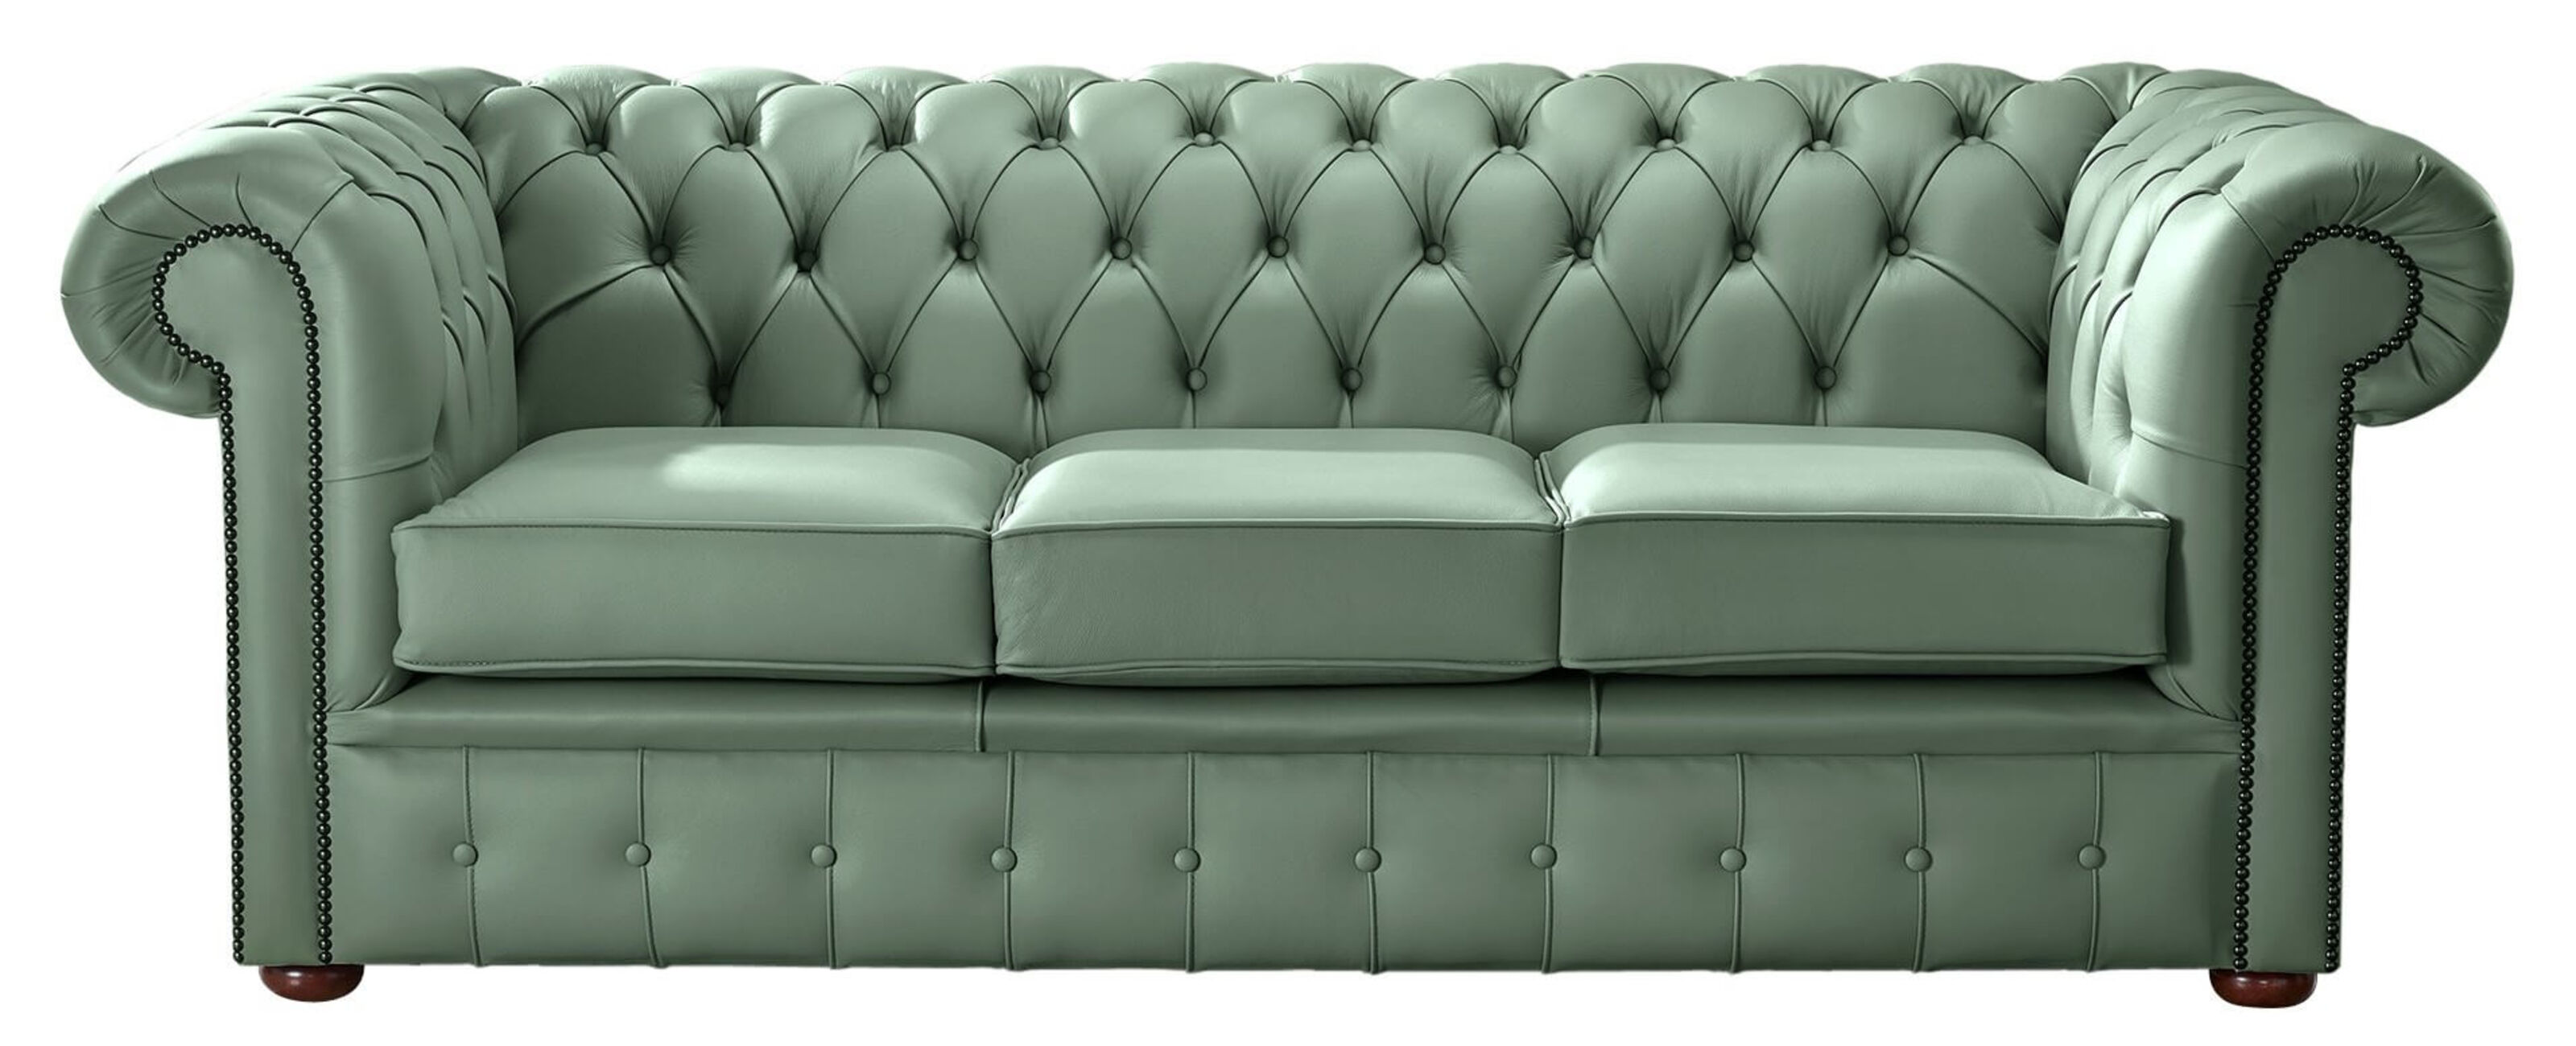 Chesterfield Sofas: The Epitome of Excellence  %Post Title